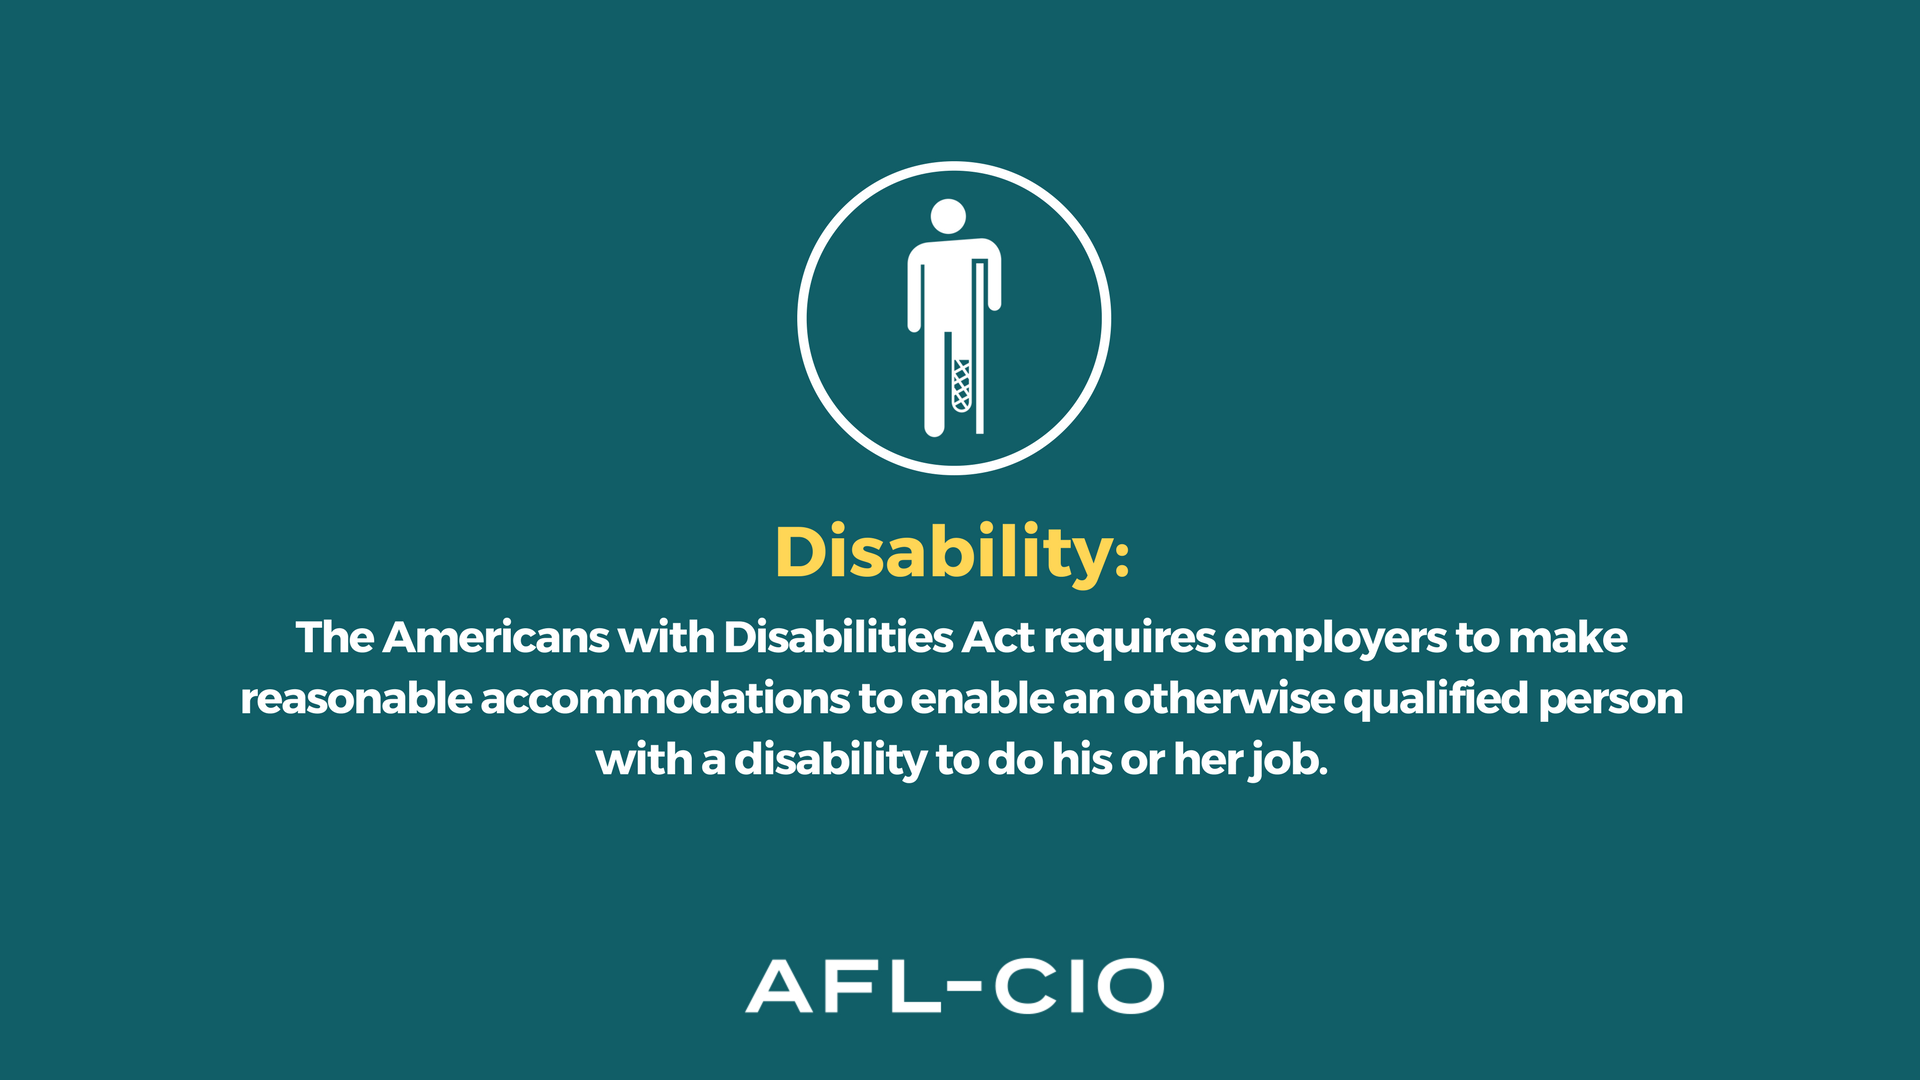 Disability: The Americans with Disabilities Act requires employers to make reasonable accommodations to enable an otherwise qualified person with a disability to do his or her job.